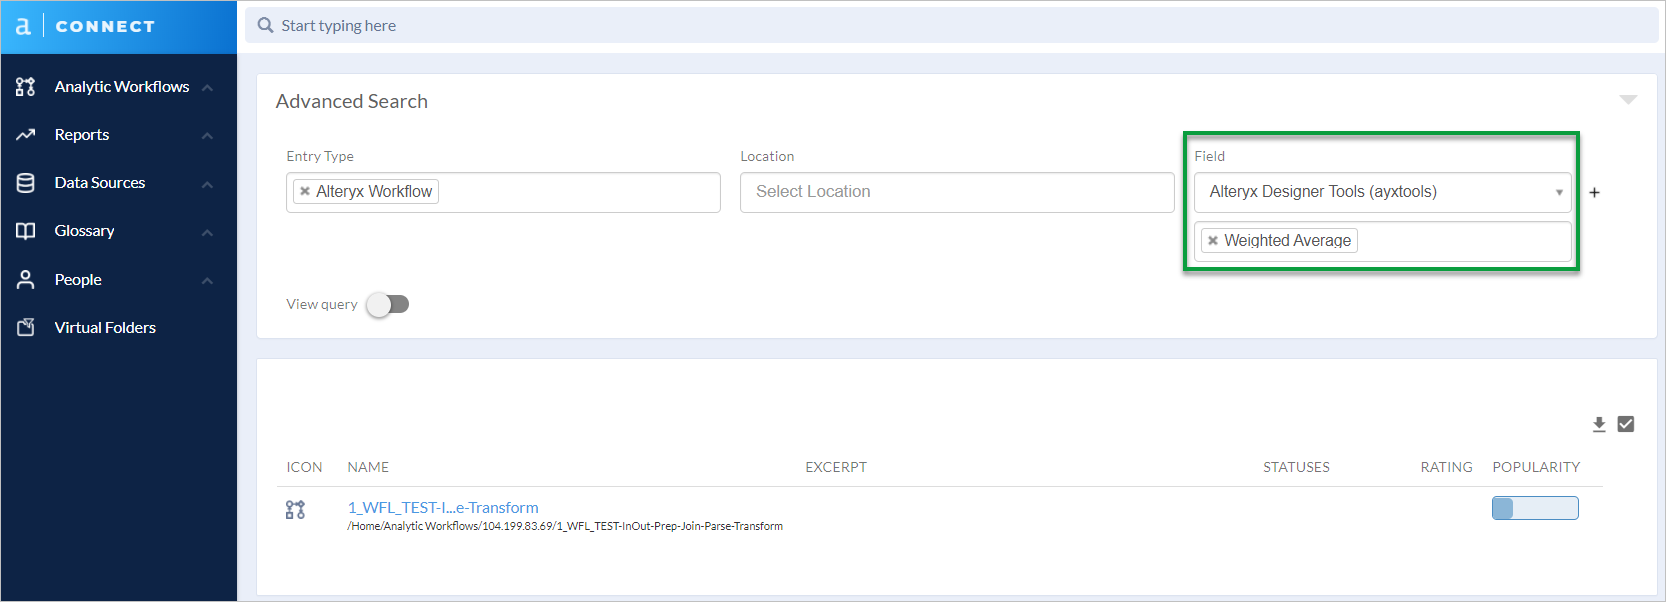 Screenshot of Connect showing Advanced Search using the filter Alteryx Designer Tools.